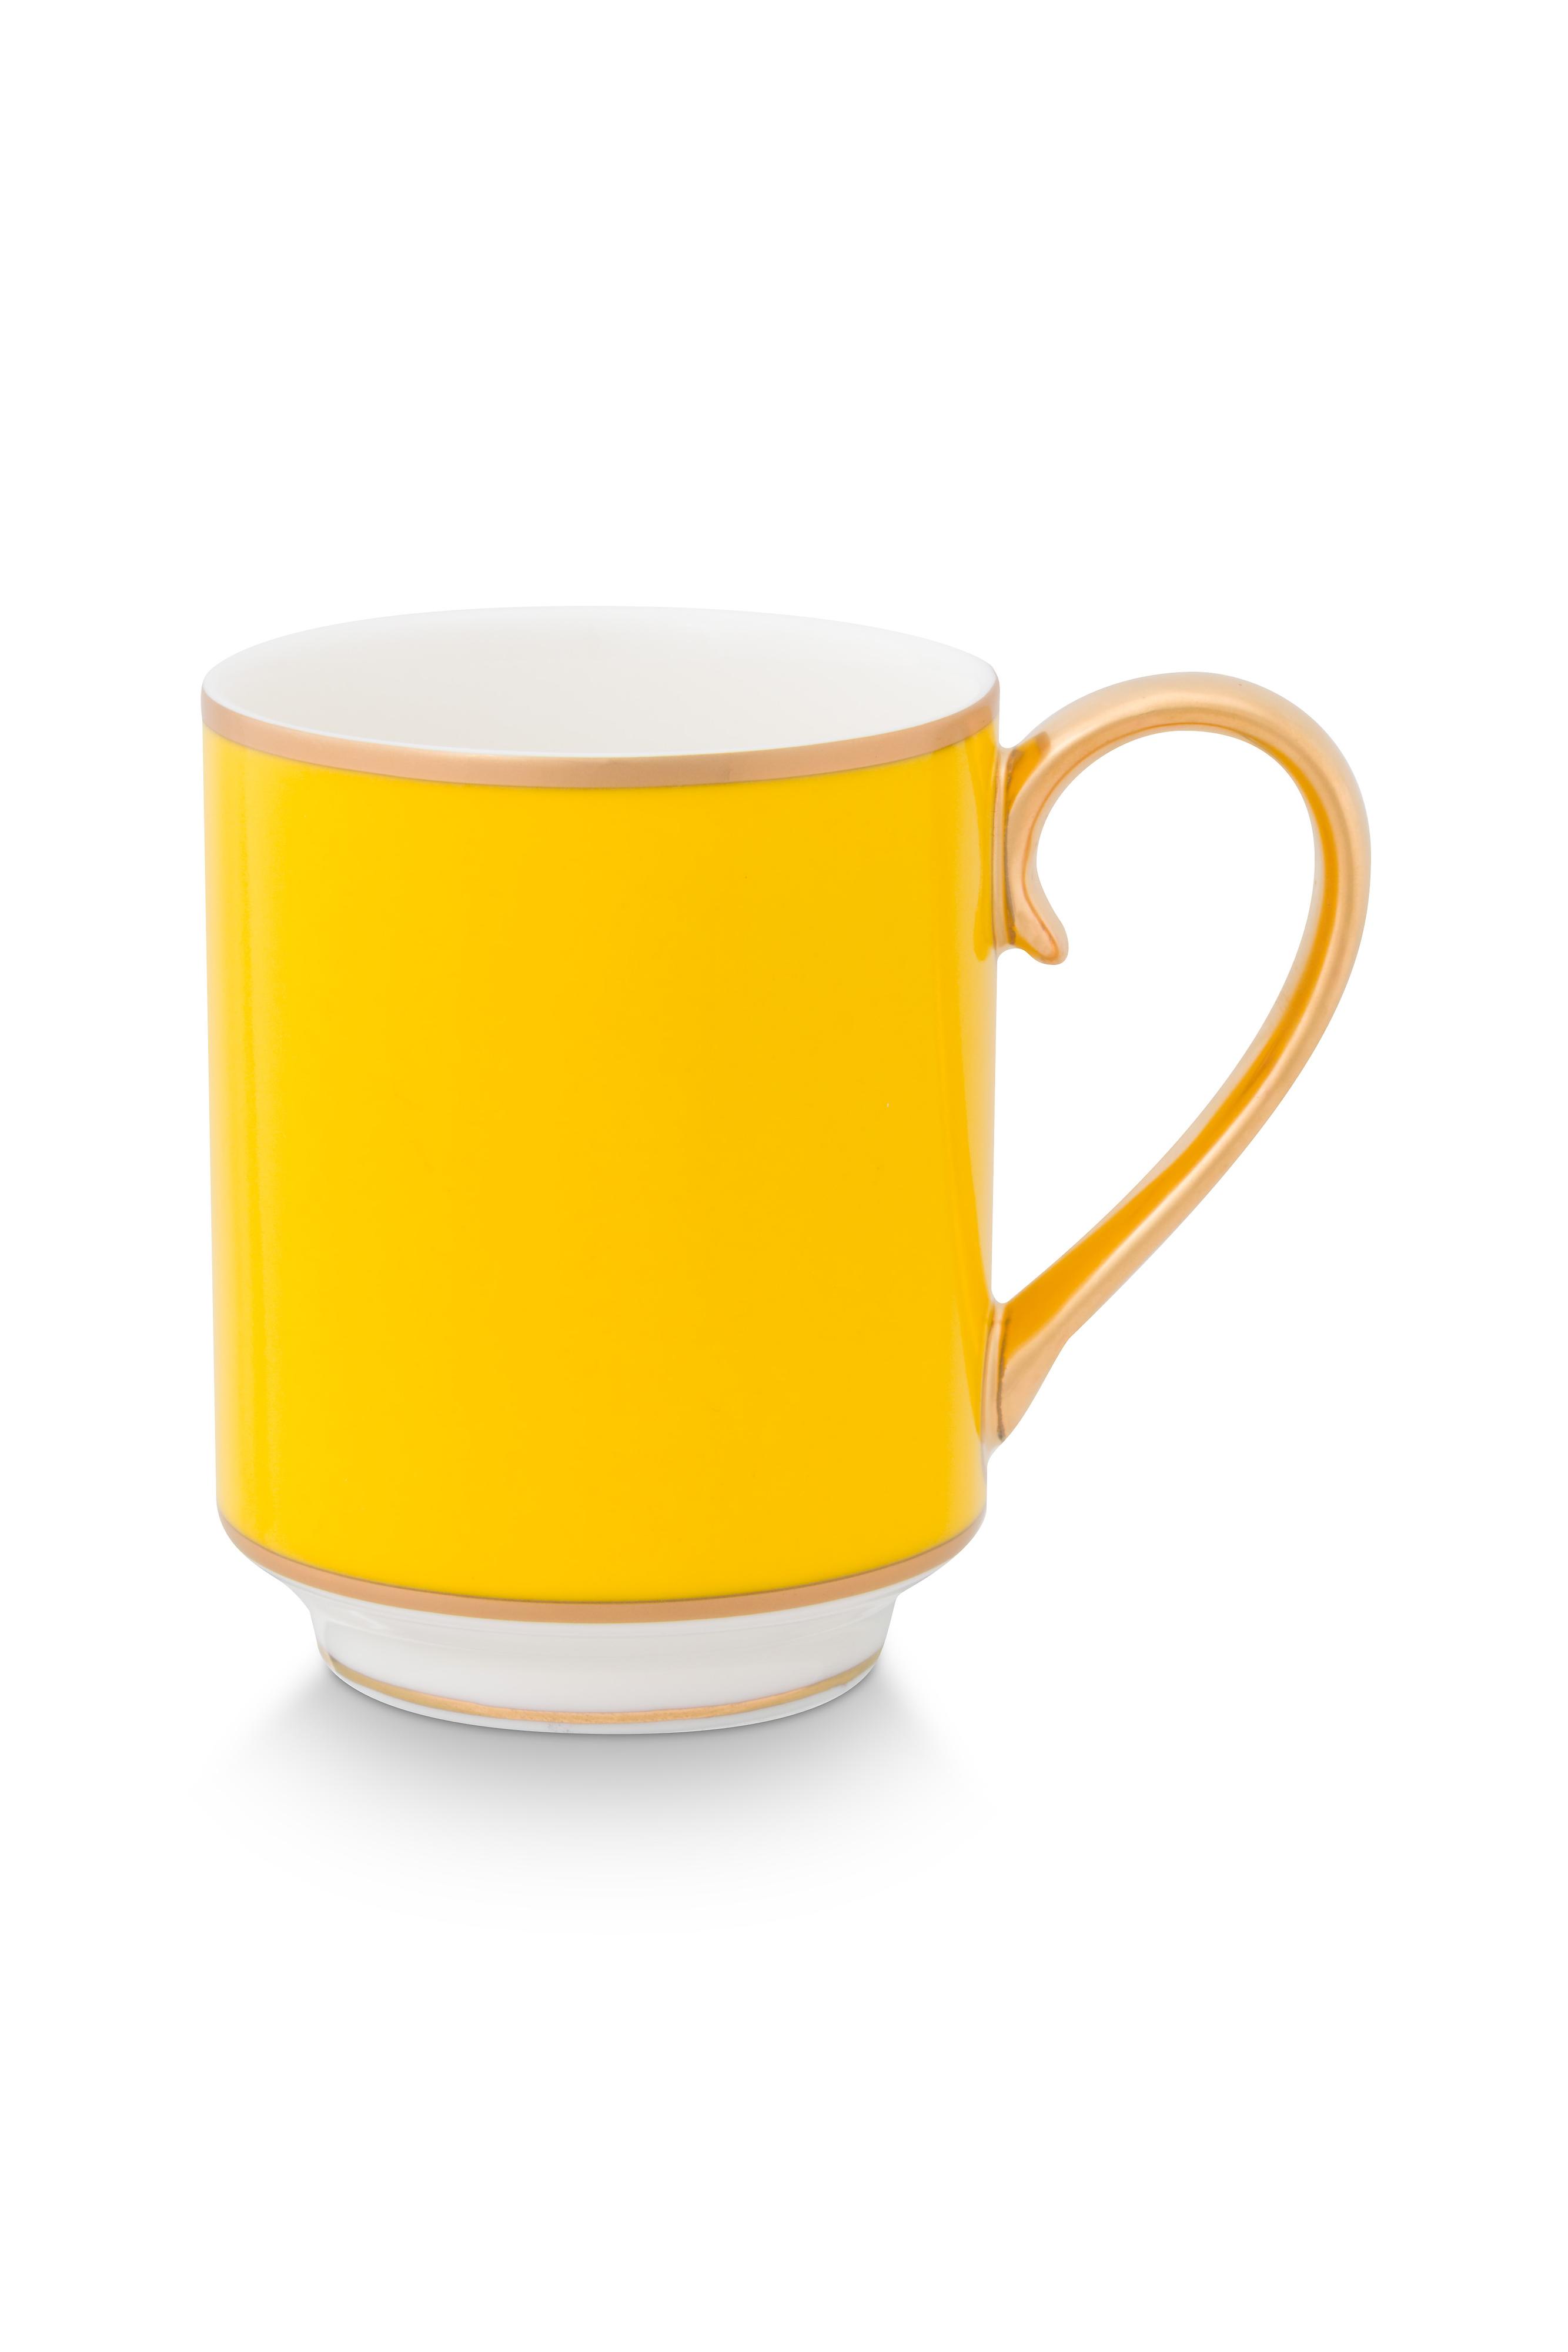 Mug Small With Ear Pip Chique Gold-yellow 250ml Gift